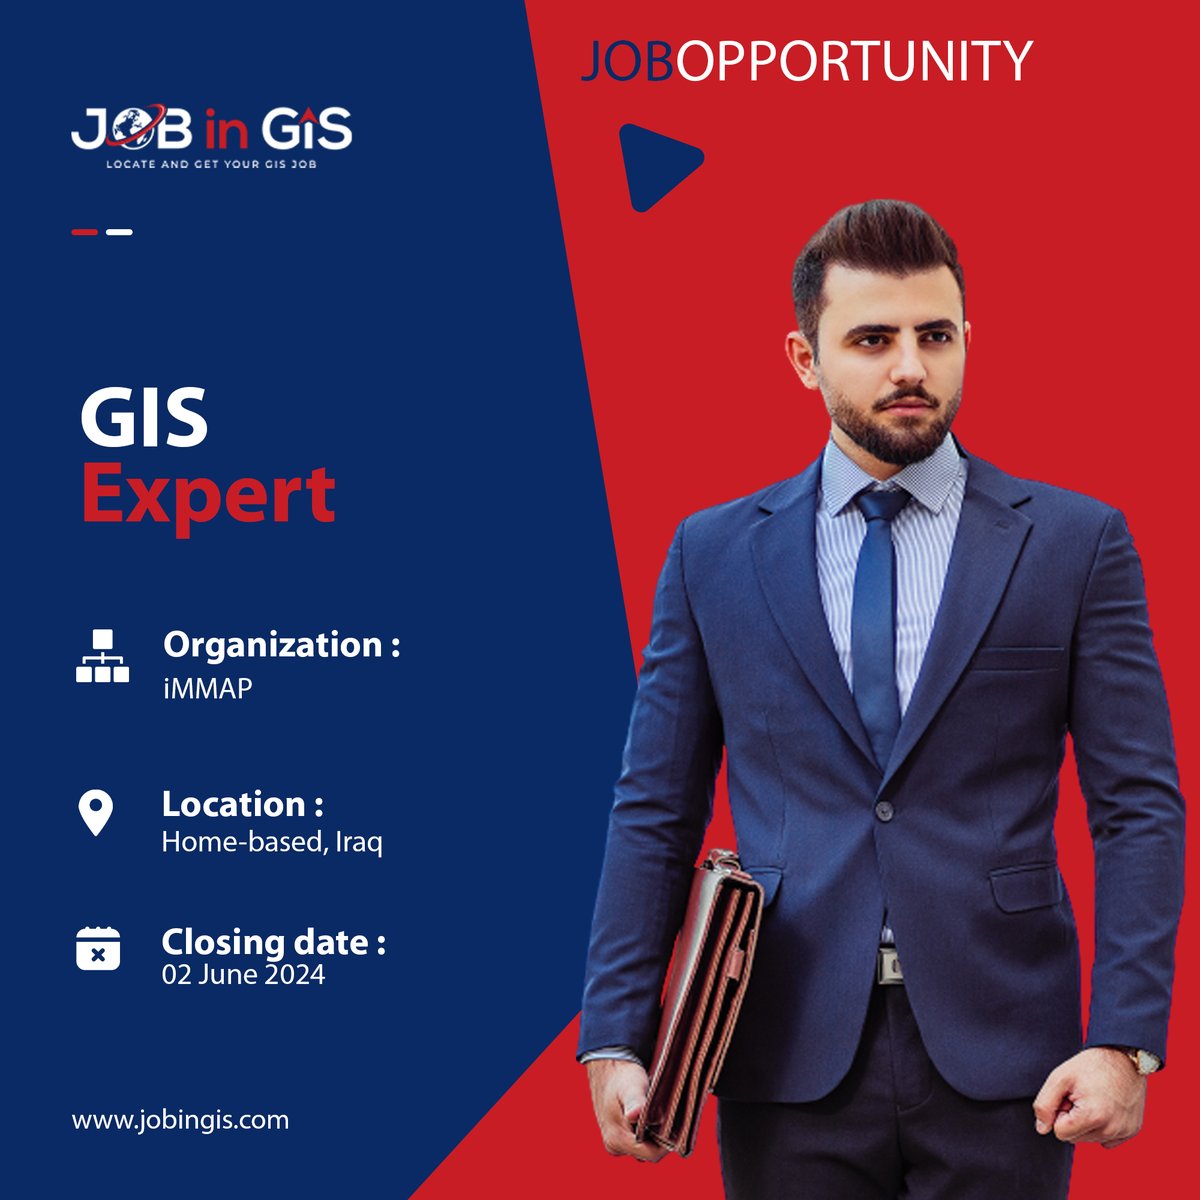 #jobingis : iMMAP is hiring a GIS Expert
📍: Home-based, #Iraq 

Apply here 👉 : jobingis.com/jobs/gis-exper…

#Jobs #mapping #GIS #geospatial #remotesensing #gisjobs #Geography #cartography #remotejobs #remotework